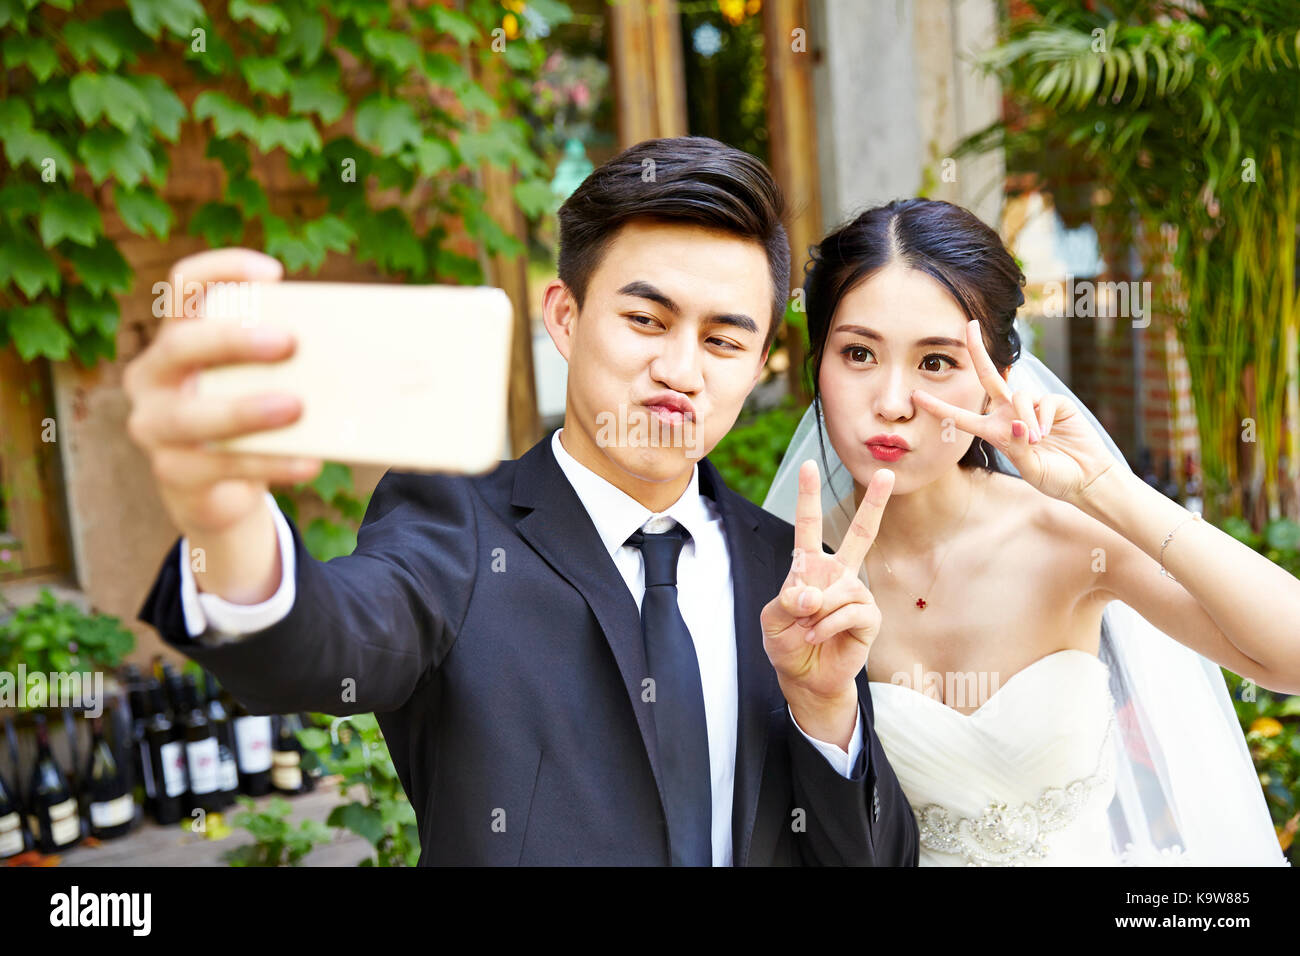 happy young asian bride and groom making a face while taking a selfie using cellphone. Stock Photo